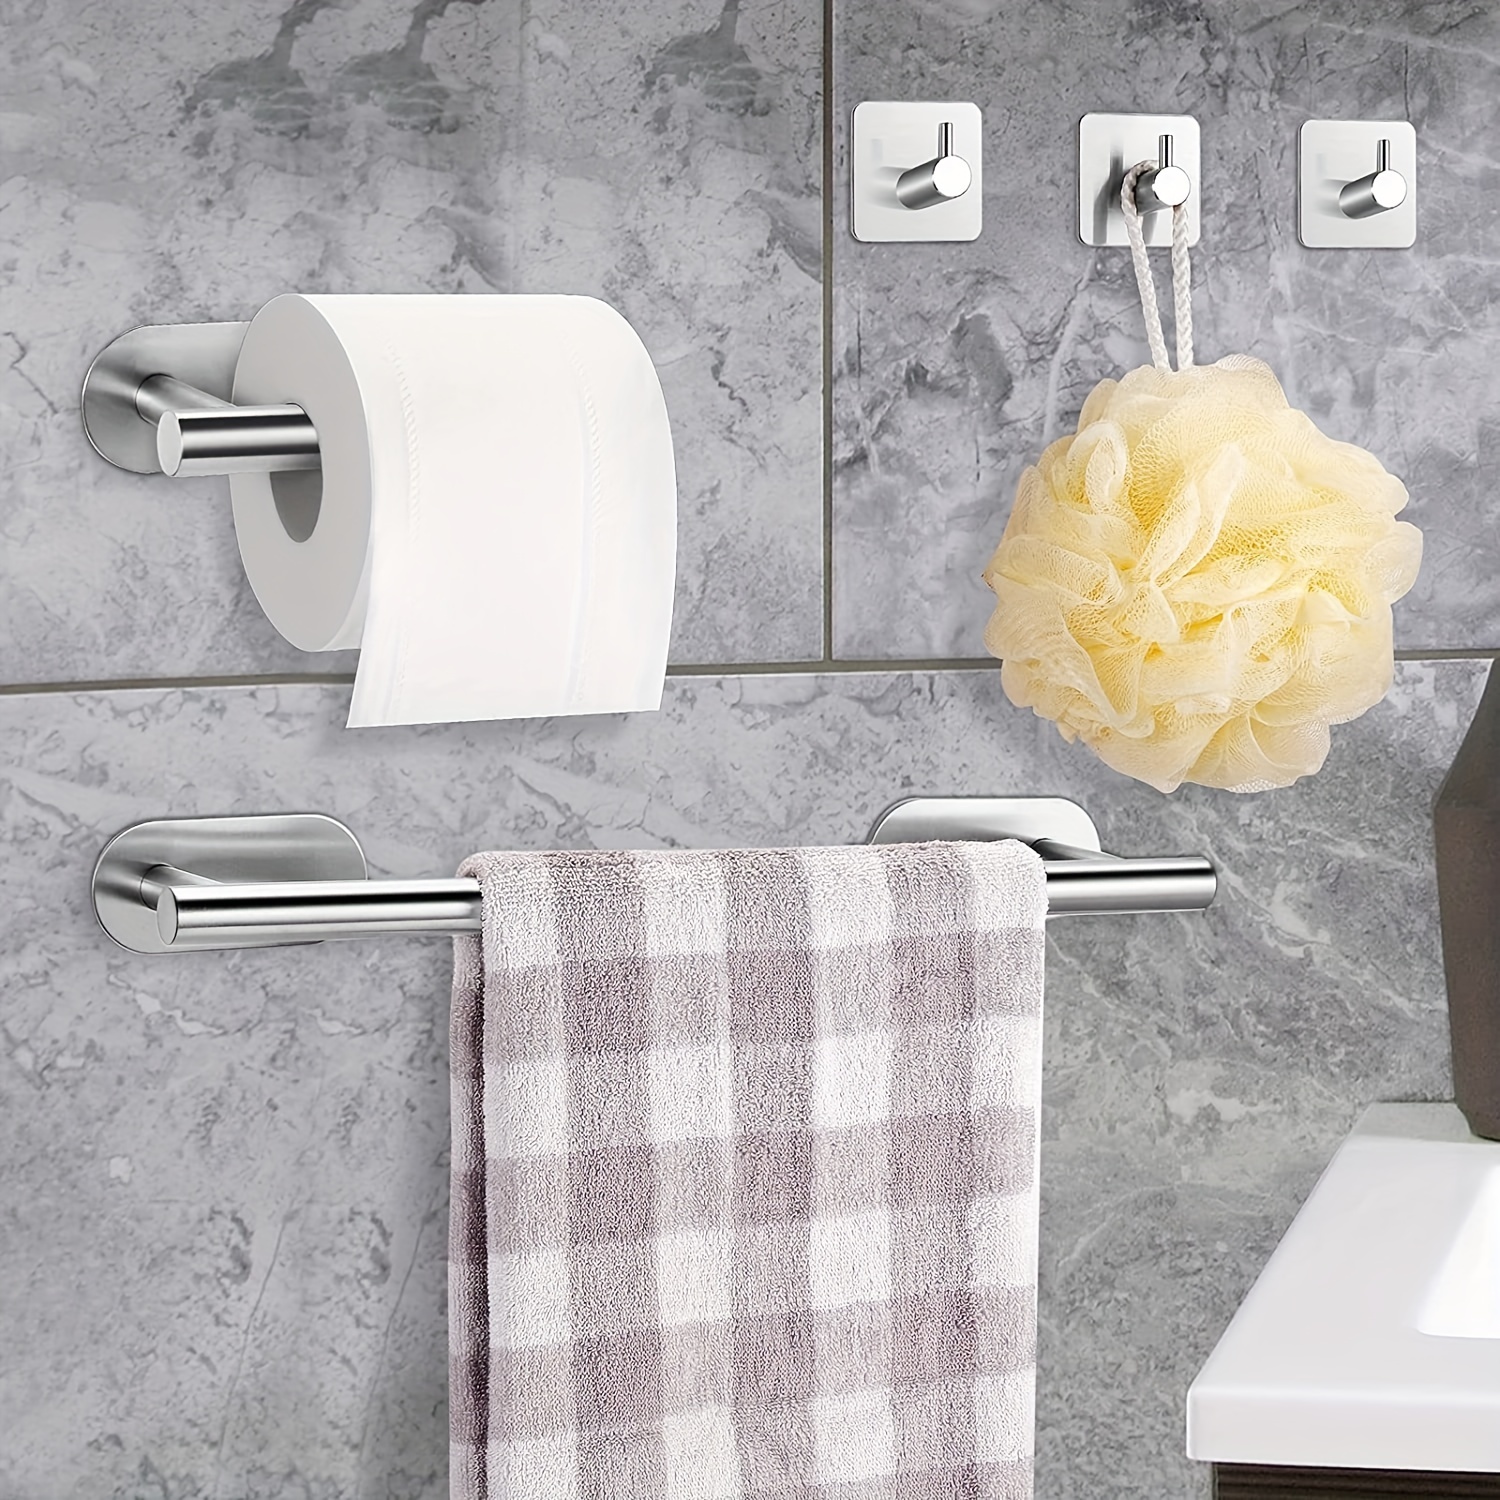 Paper Towel Holder - Self-Adhesive or Drilling, White Wall Mounted